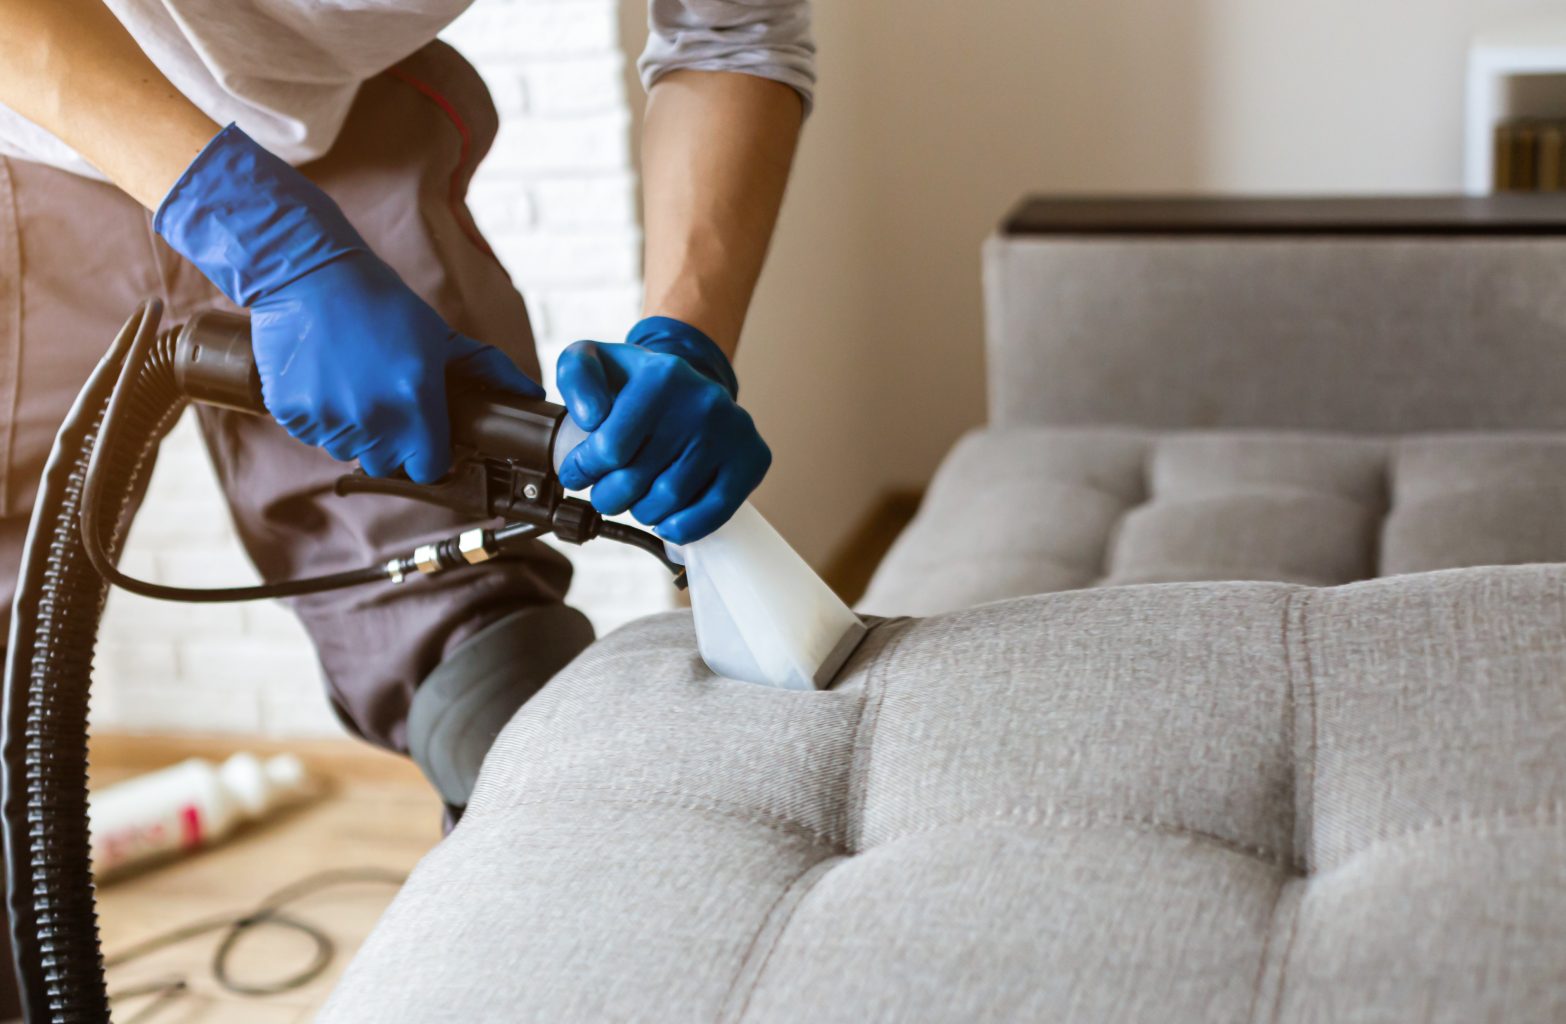 Professional Carpet Cleaning Services for Homes